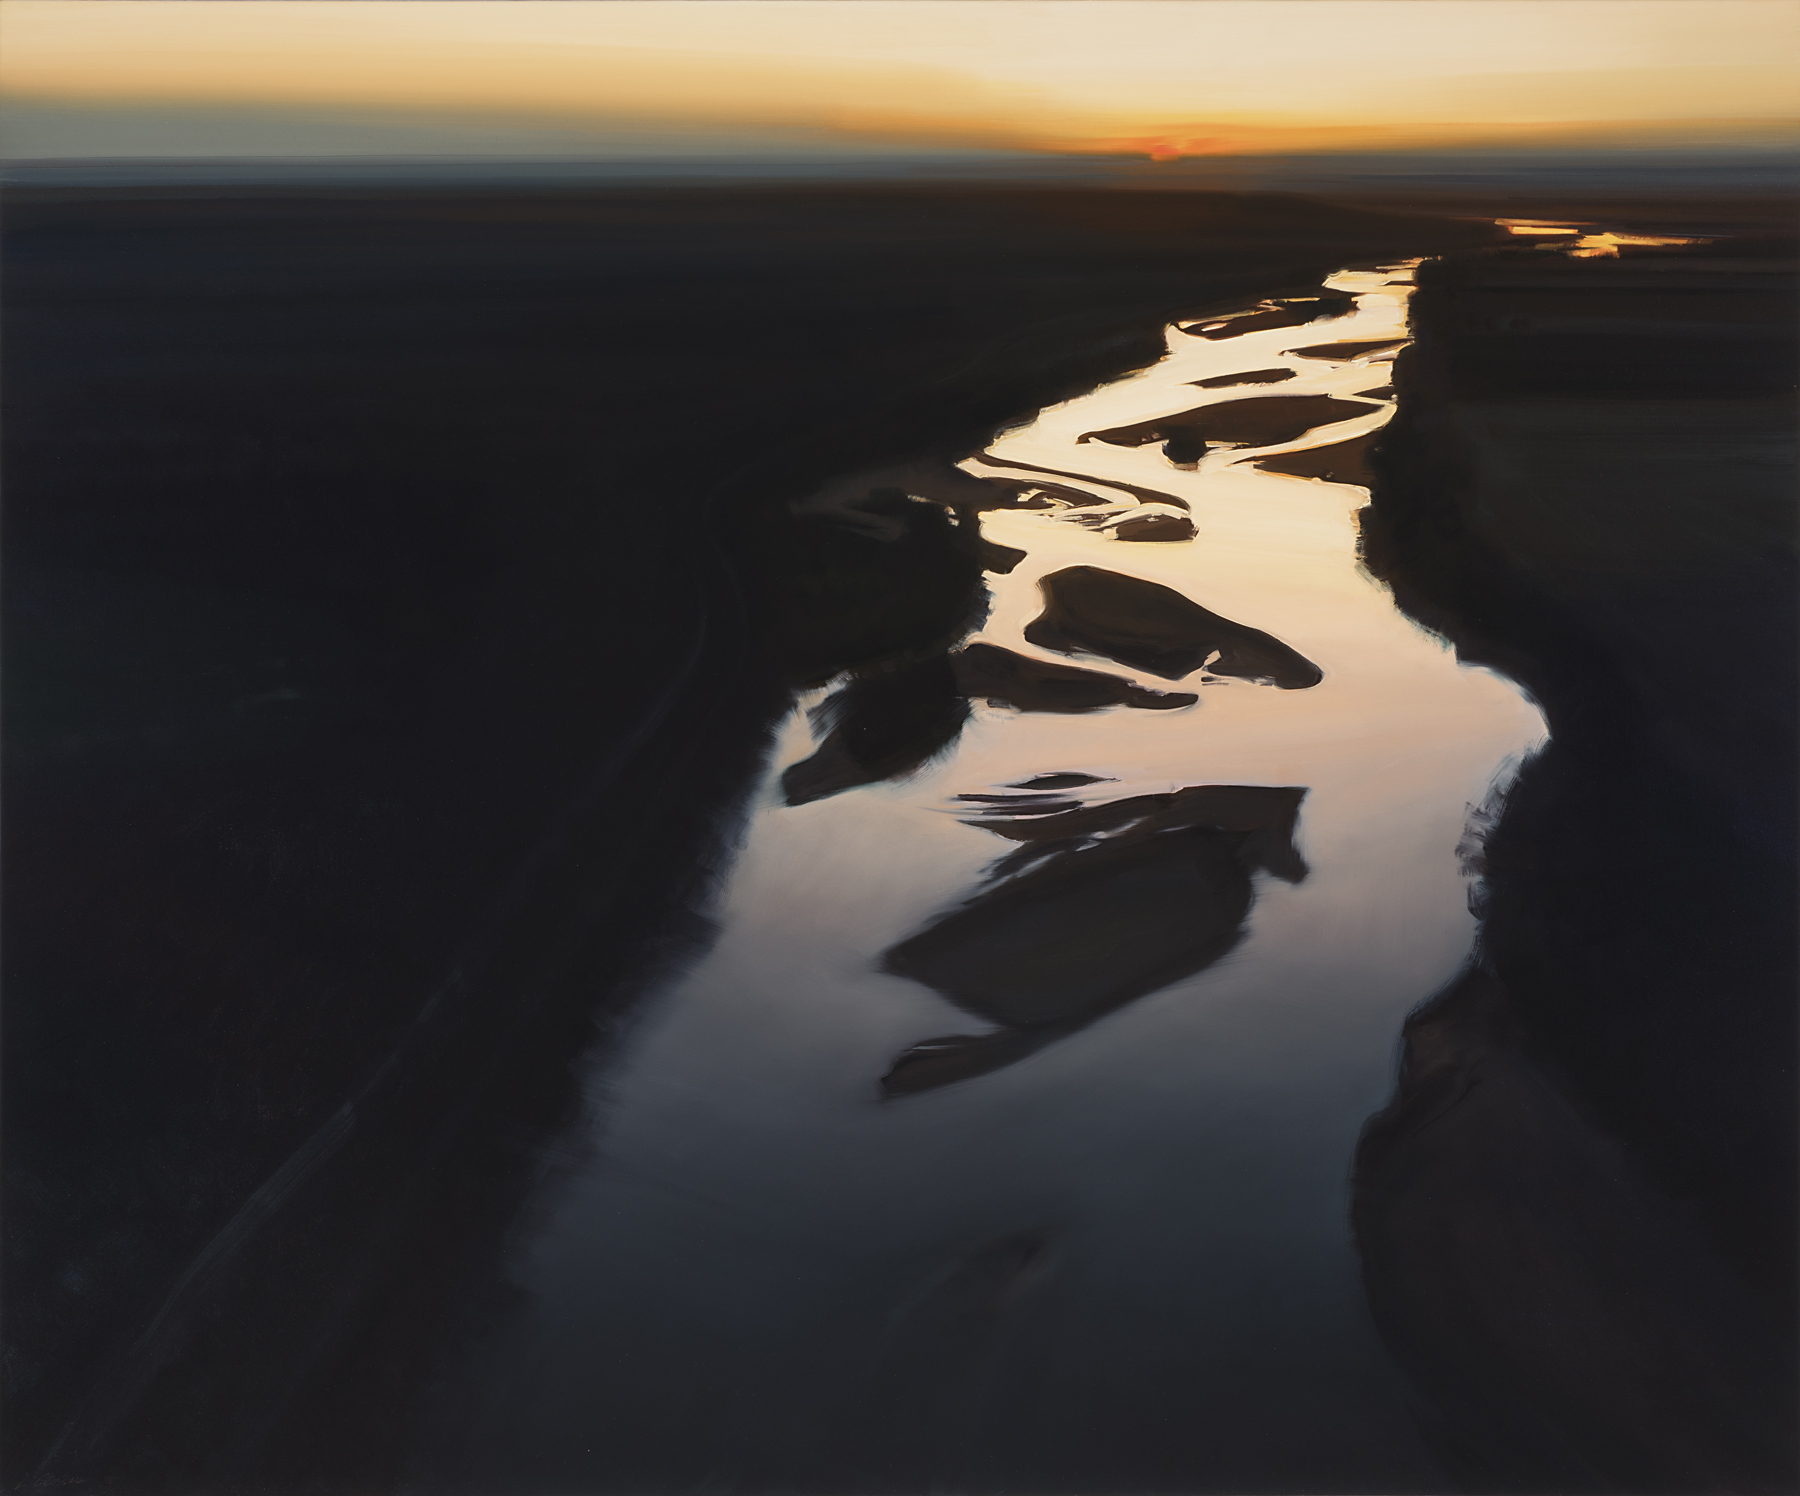 A river illuminated by the orange hues of a horizon flows through the middle of a dark landscape 